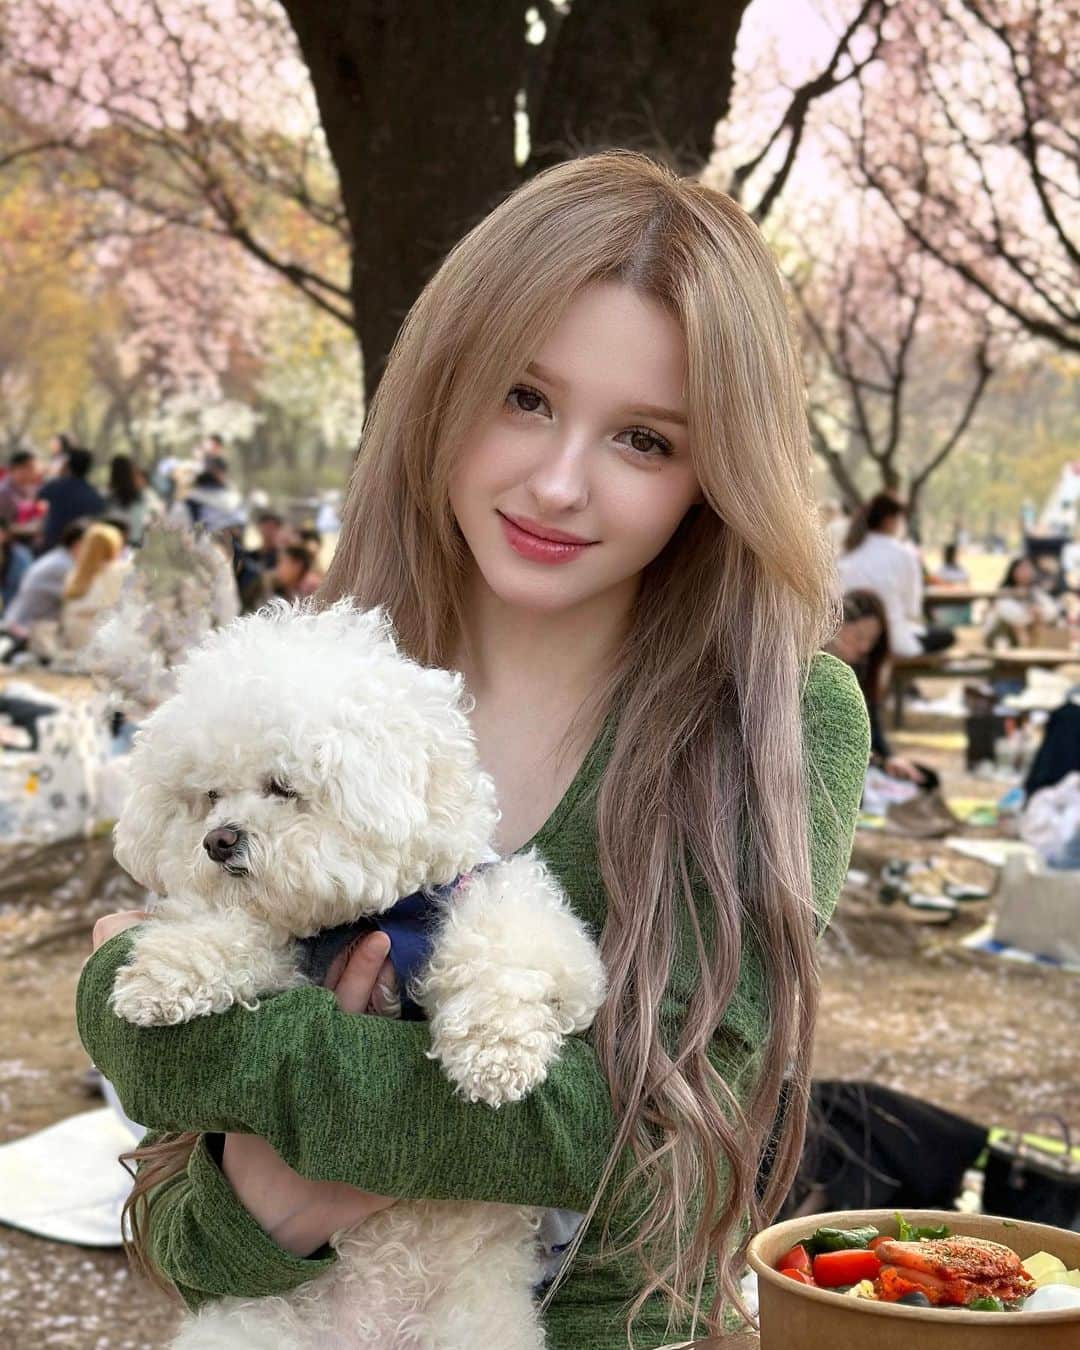 Elina 엘리나 (エリナ) のインスタグラム：「Picnic with my lovers for cherry blossom🌸 벚꽃 피크닉 보러왔어요🤍」